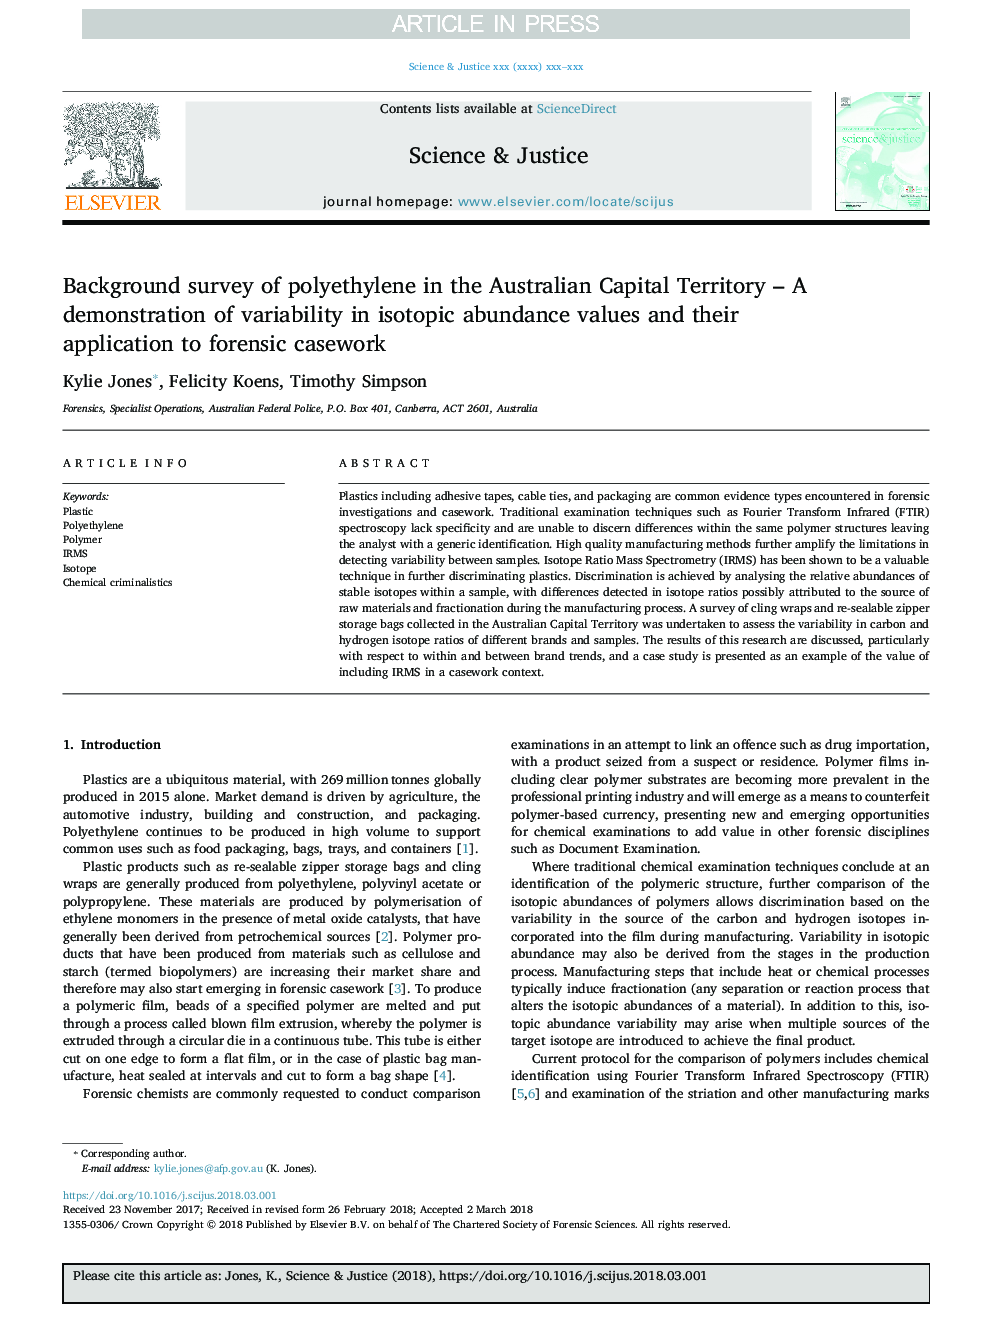 Background survey of polyethylene in the Australian Capital Territory - A demonstration of variability in isotopic abundance values and their application to forensic casework